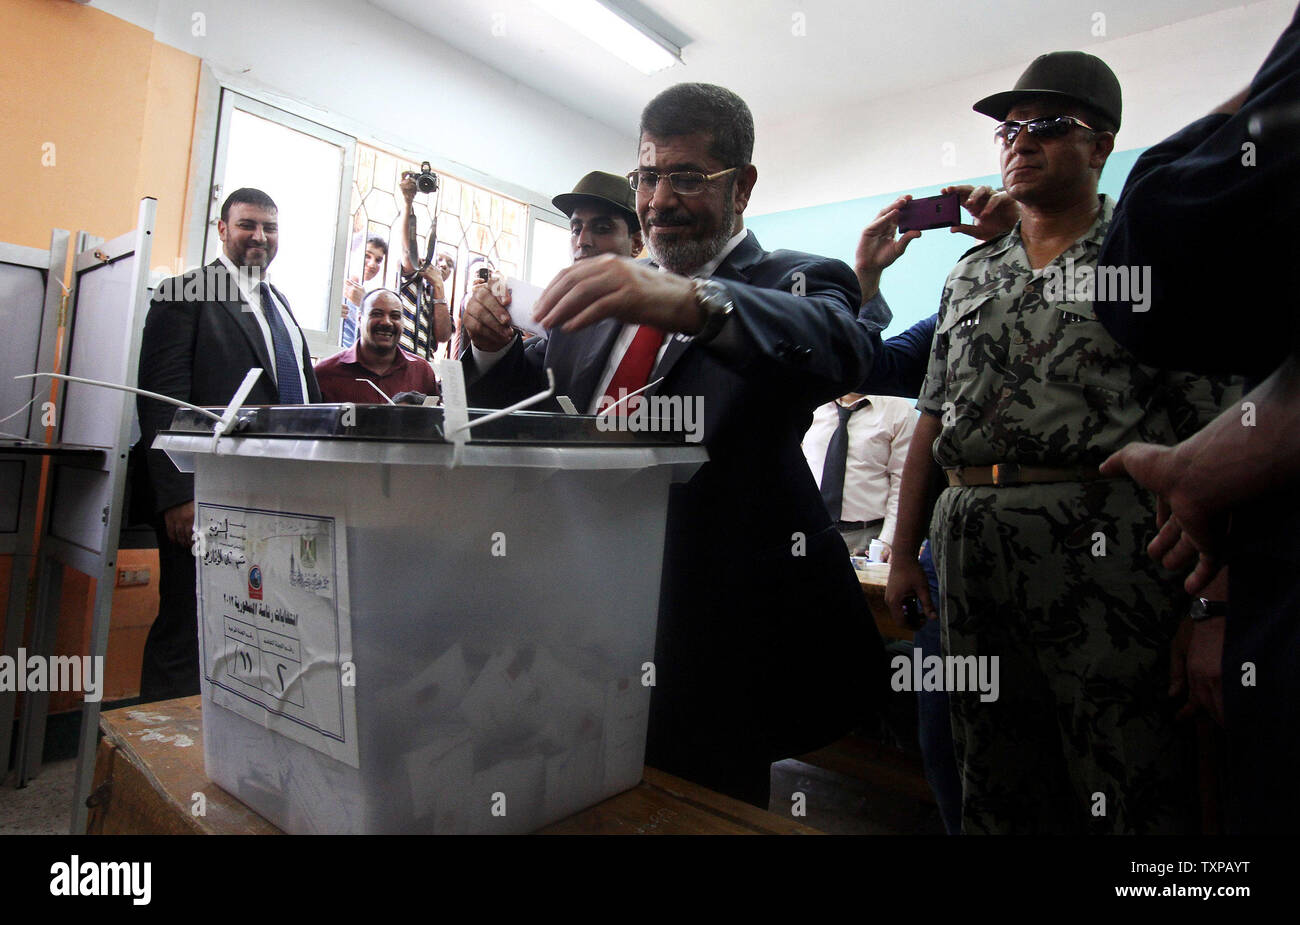 Presidential candidate of the Muslim Brotherhood, Mohamed Morsy, casts his vote at a polling station in a school in Al-Sharqya, 60 km (37 miles) northeast of Cairo in Egypt, June 16, 2012. Egypt's first free presidential election concludes this weekend in a run-off between the Muslim Brotherhood's candidate Mohamed Morsy and Ahmed Shafik, the last prime minister of ousted leader Hosni Mubarak. UPI/Ahmed Jomaa Stock Photo